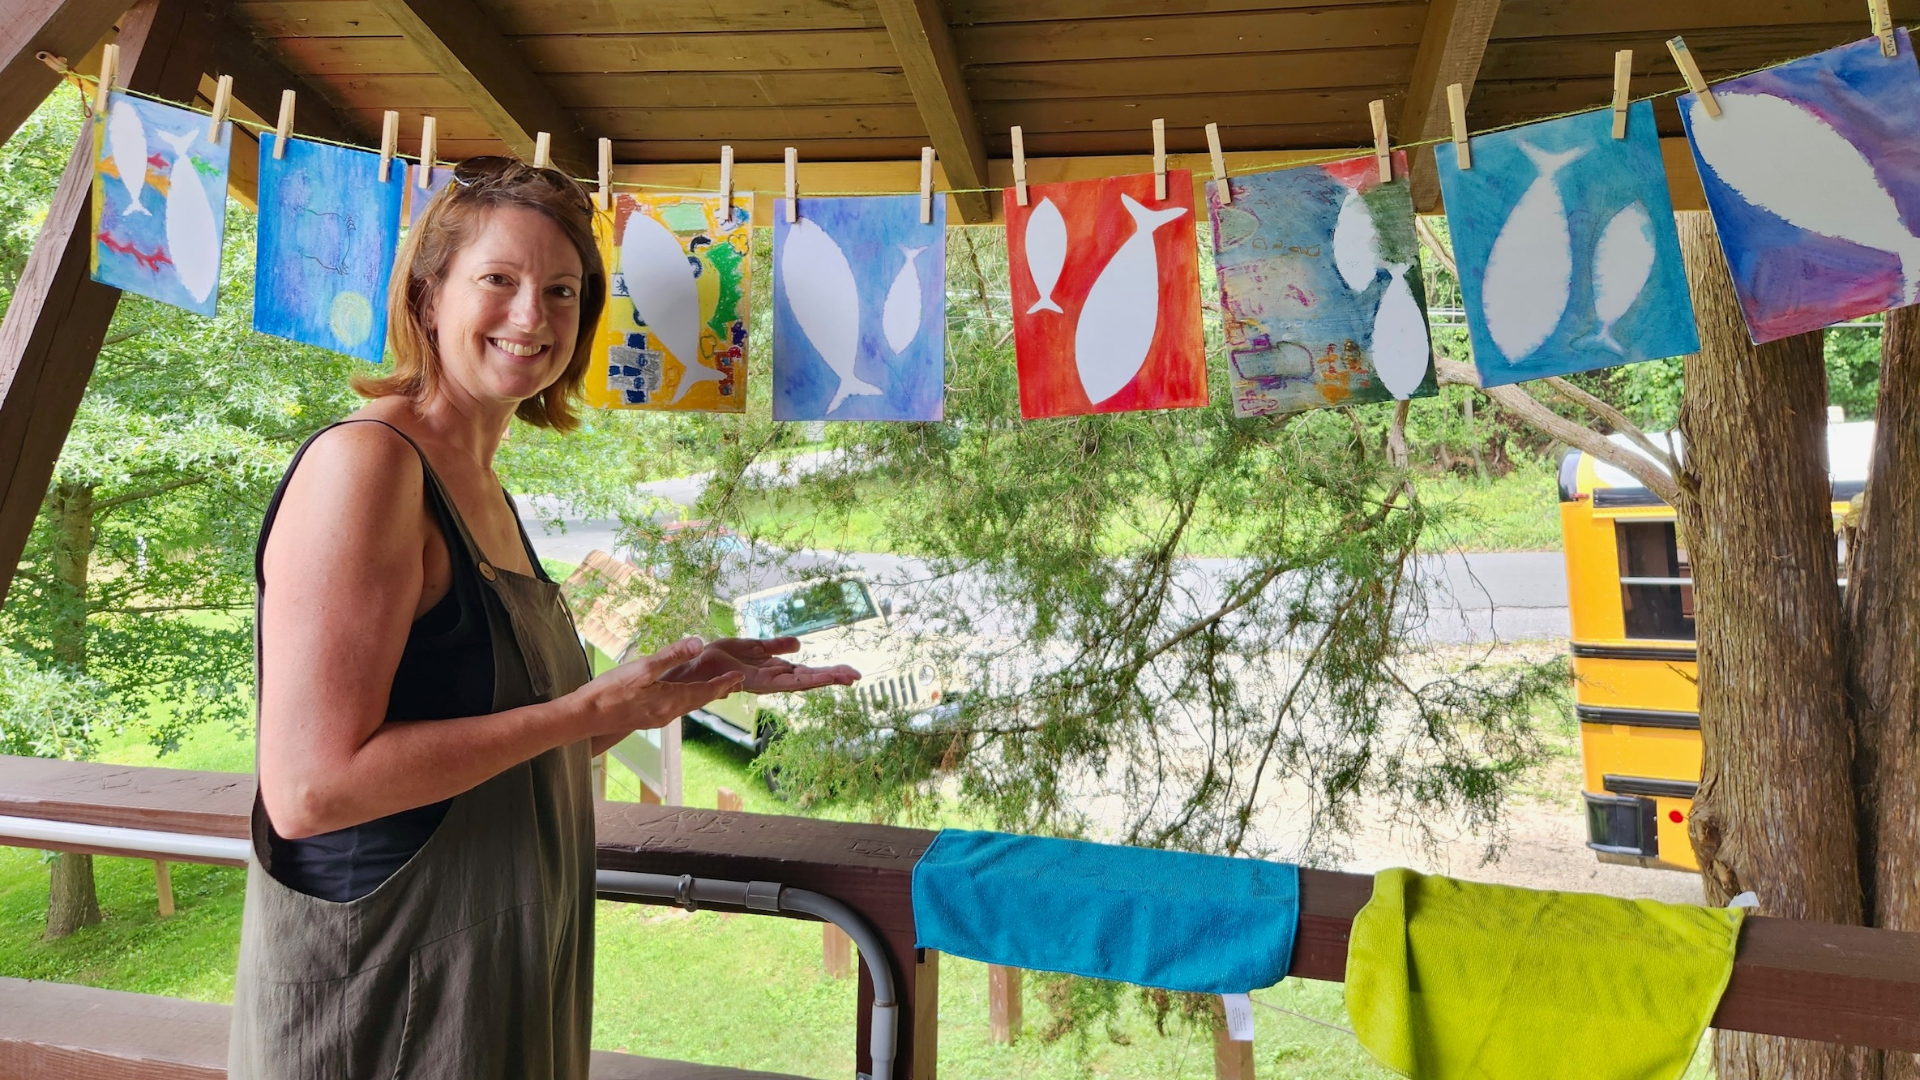 Woman smiling in front of laundry line with children's paintings of fish at camp beetree.